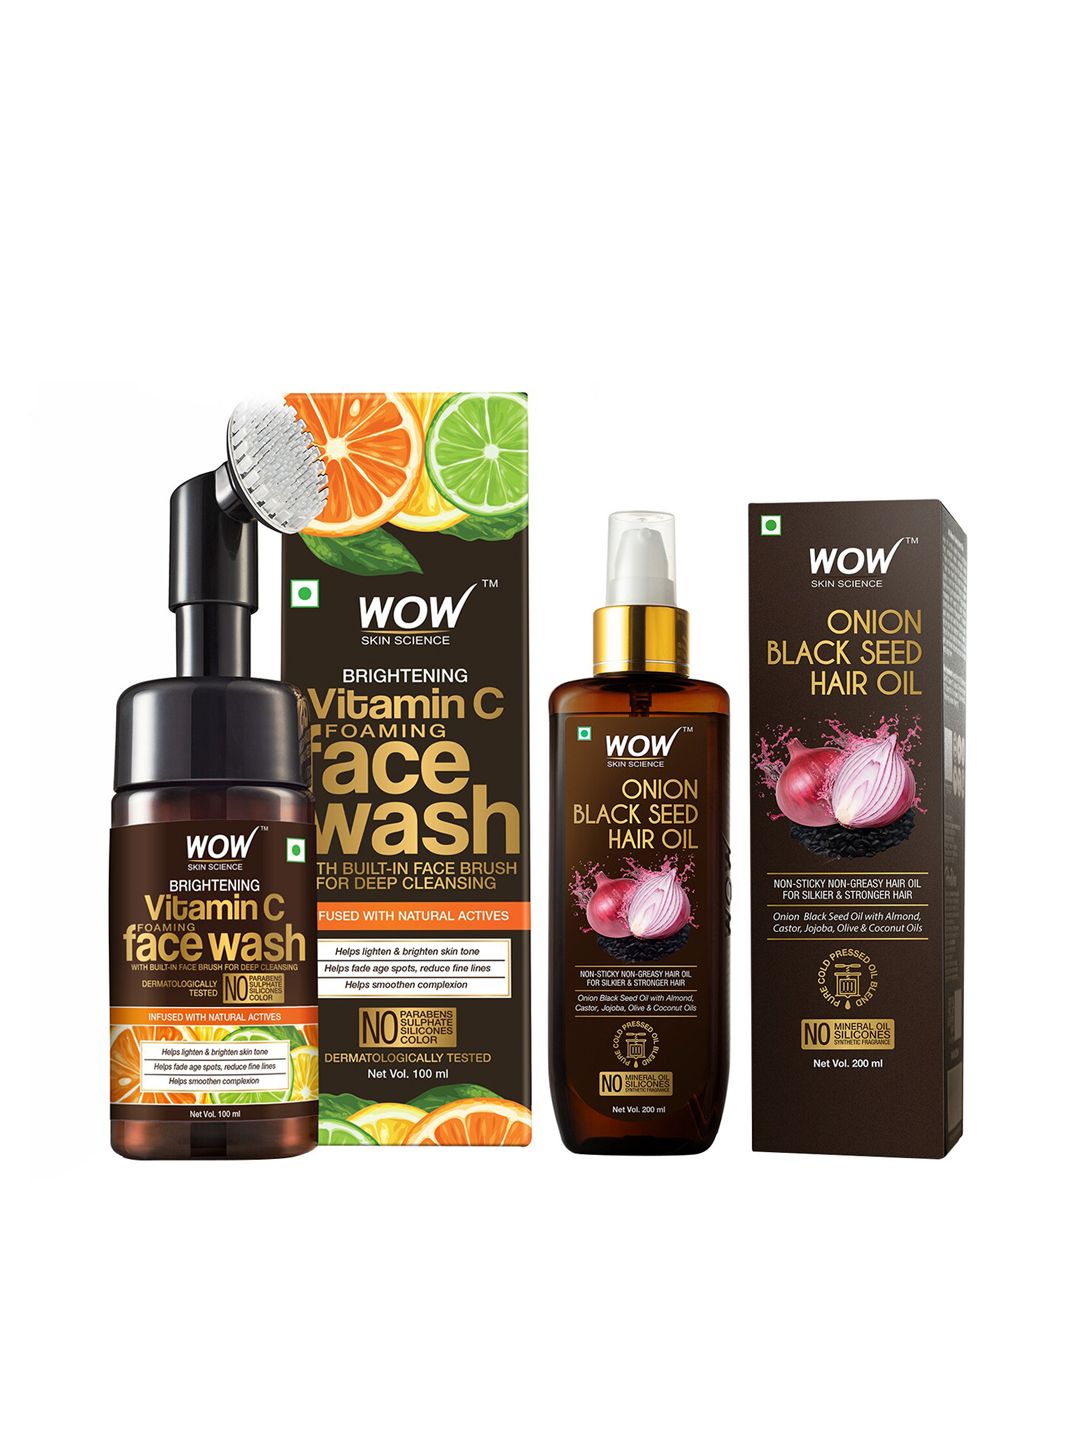 WOW SKIN SCIENCE Set of Onion Black Seed Hair Oil & Brightening Vitamin C Face Wash Price in India